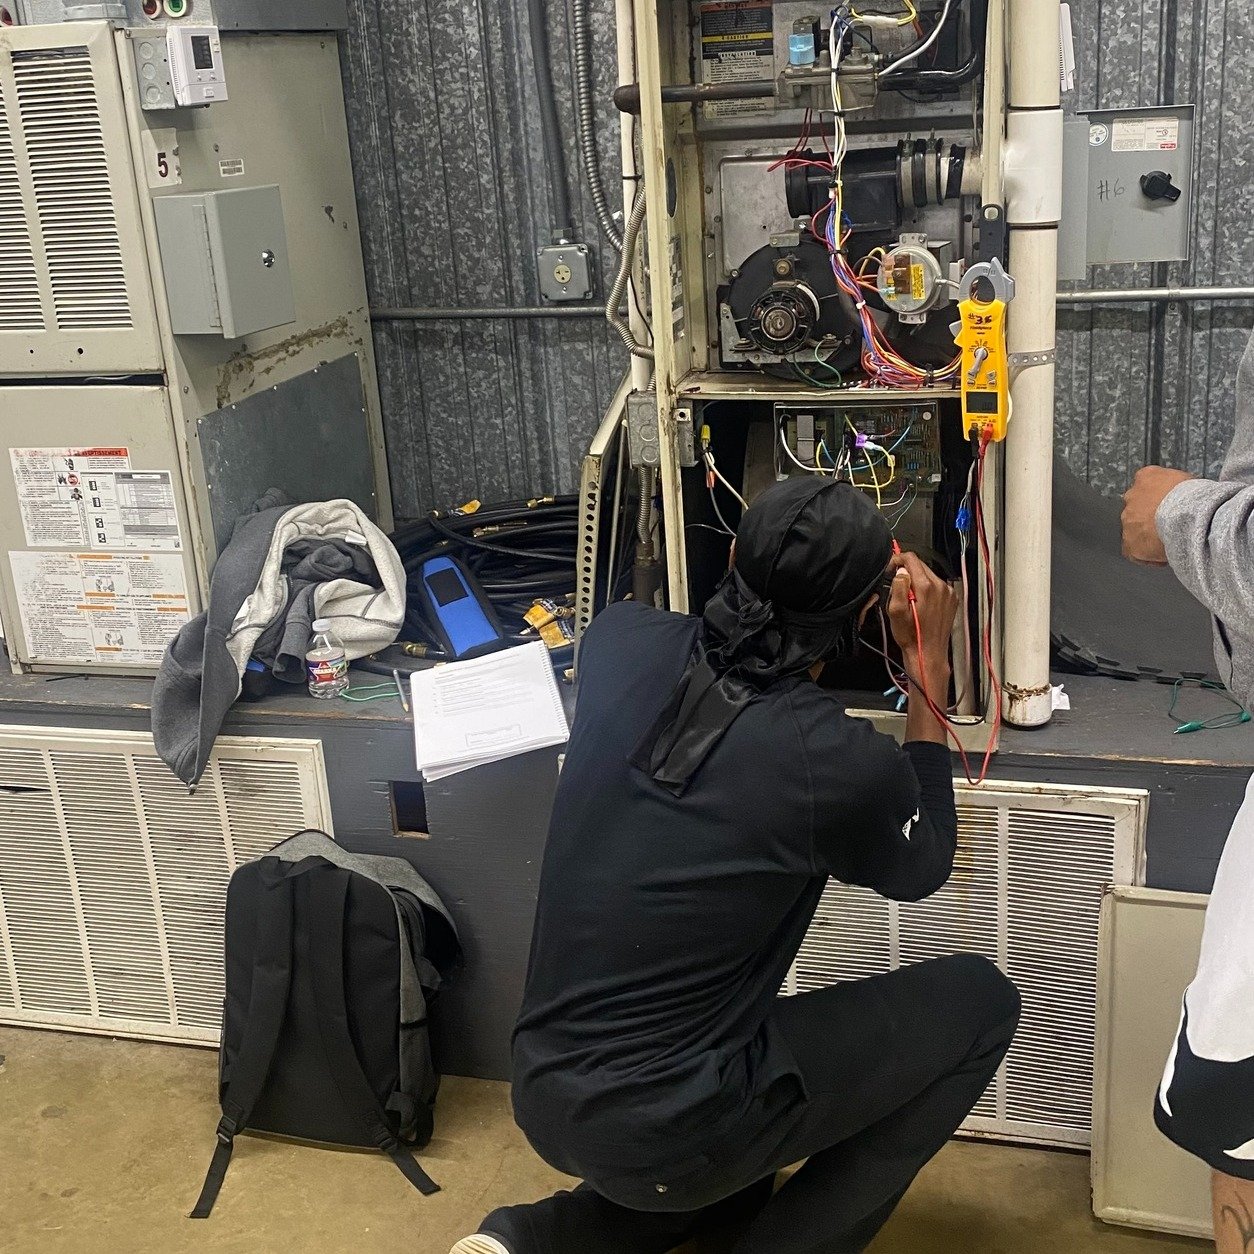 Last week our plumbers had training with Rinnai, but our guy Jay spent all week at the Ultimate Tech Class brushing up on Electrical for HVAC. At Sanders, we value ongoing education so that our team is knowledgeable and ready to serve!